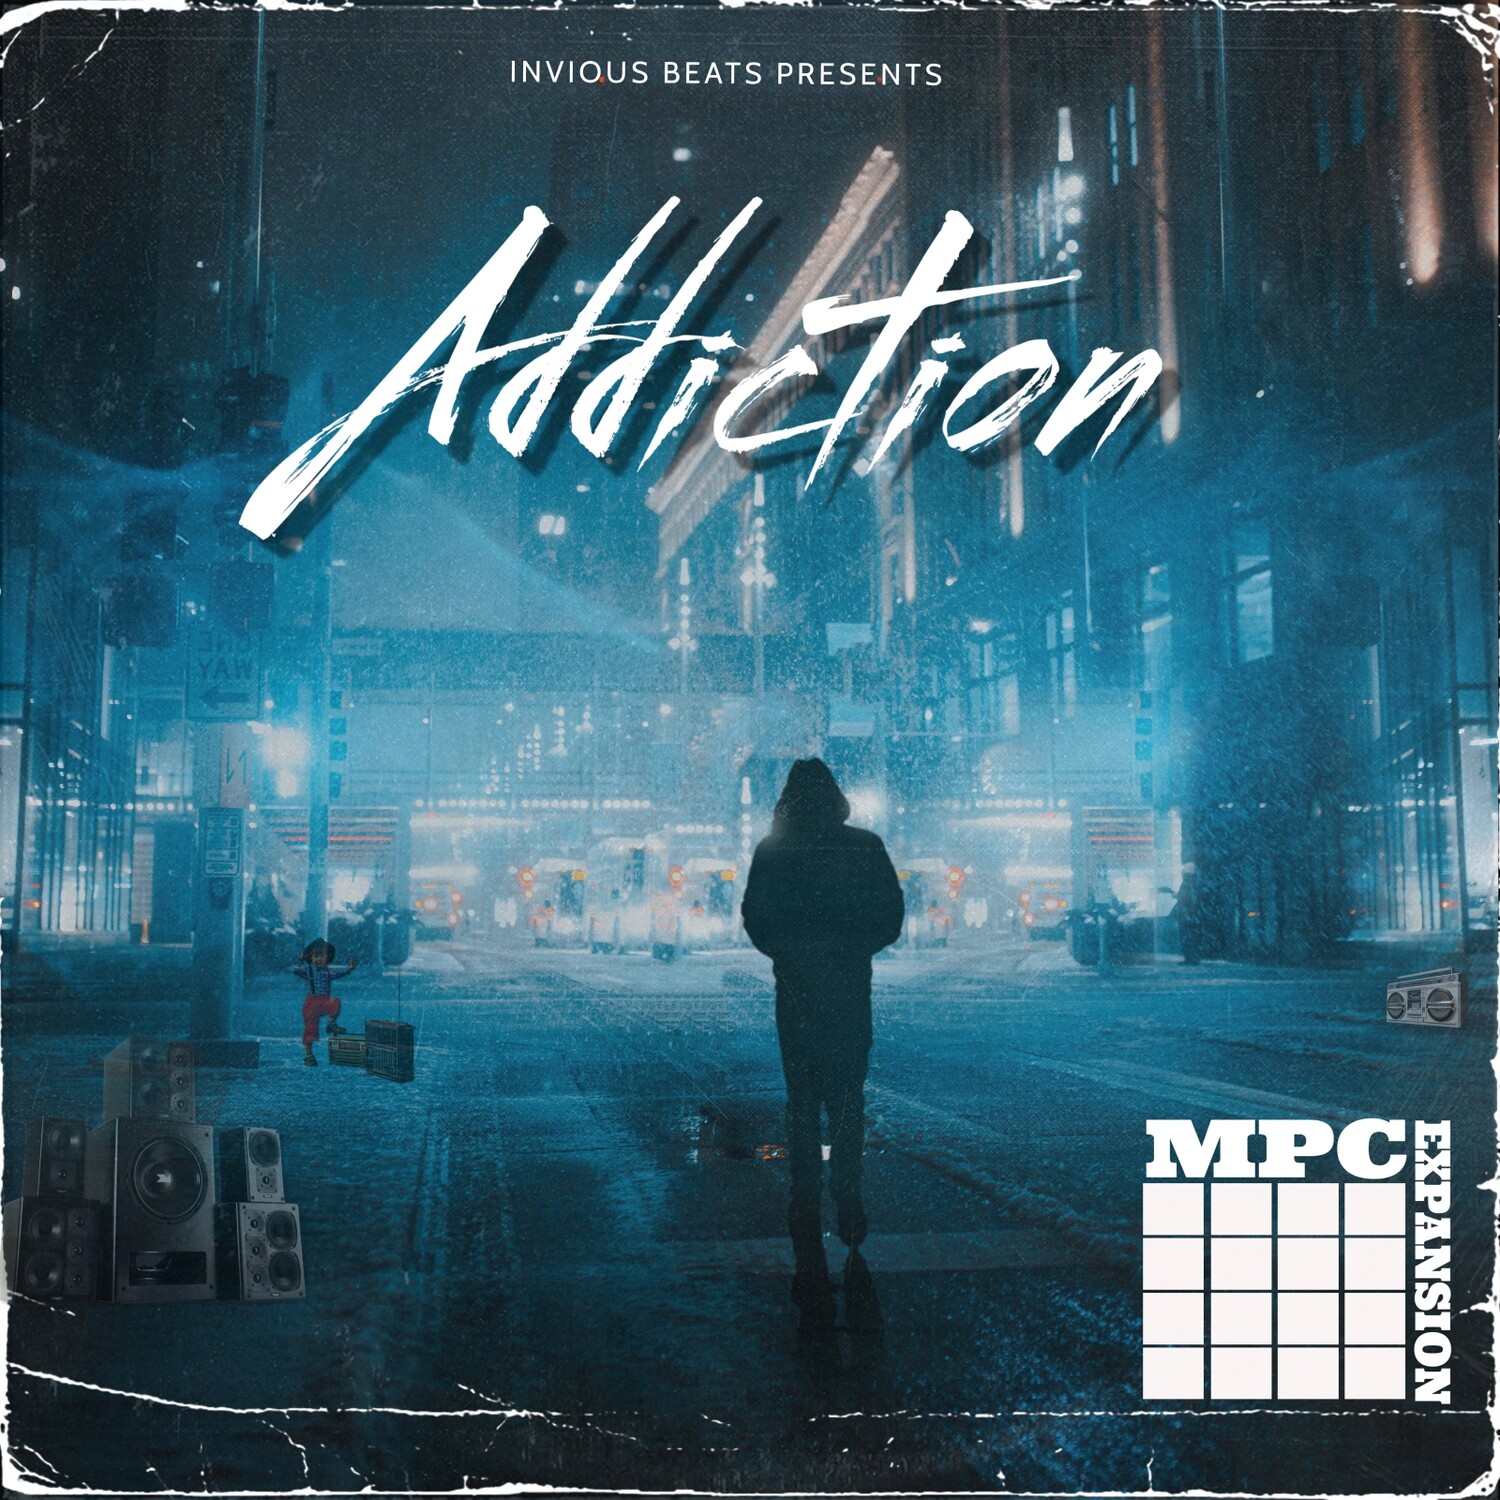 MPC EXPANSION "ADDICTION" by INVIOUS